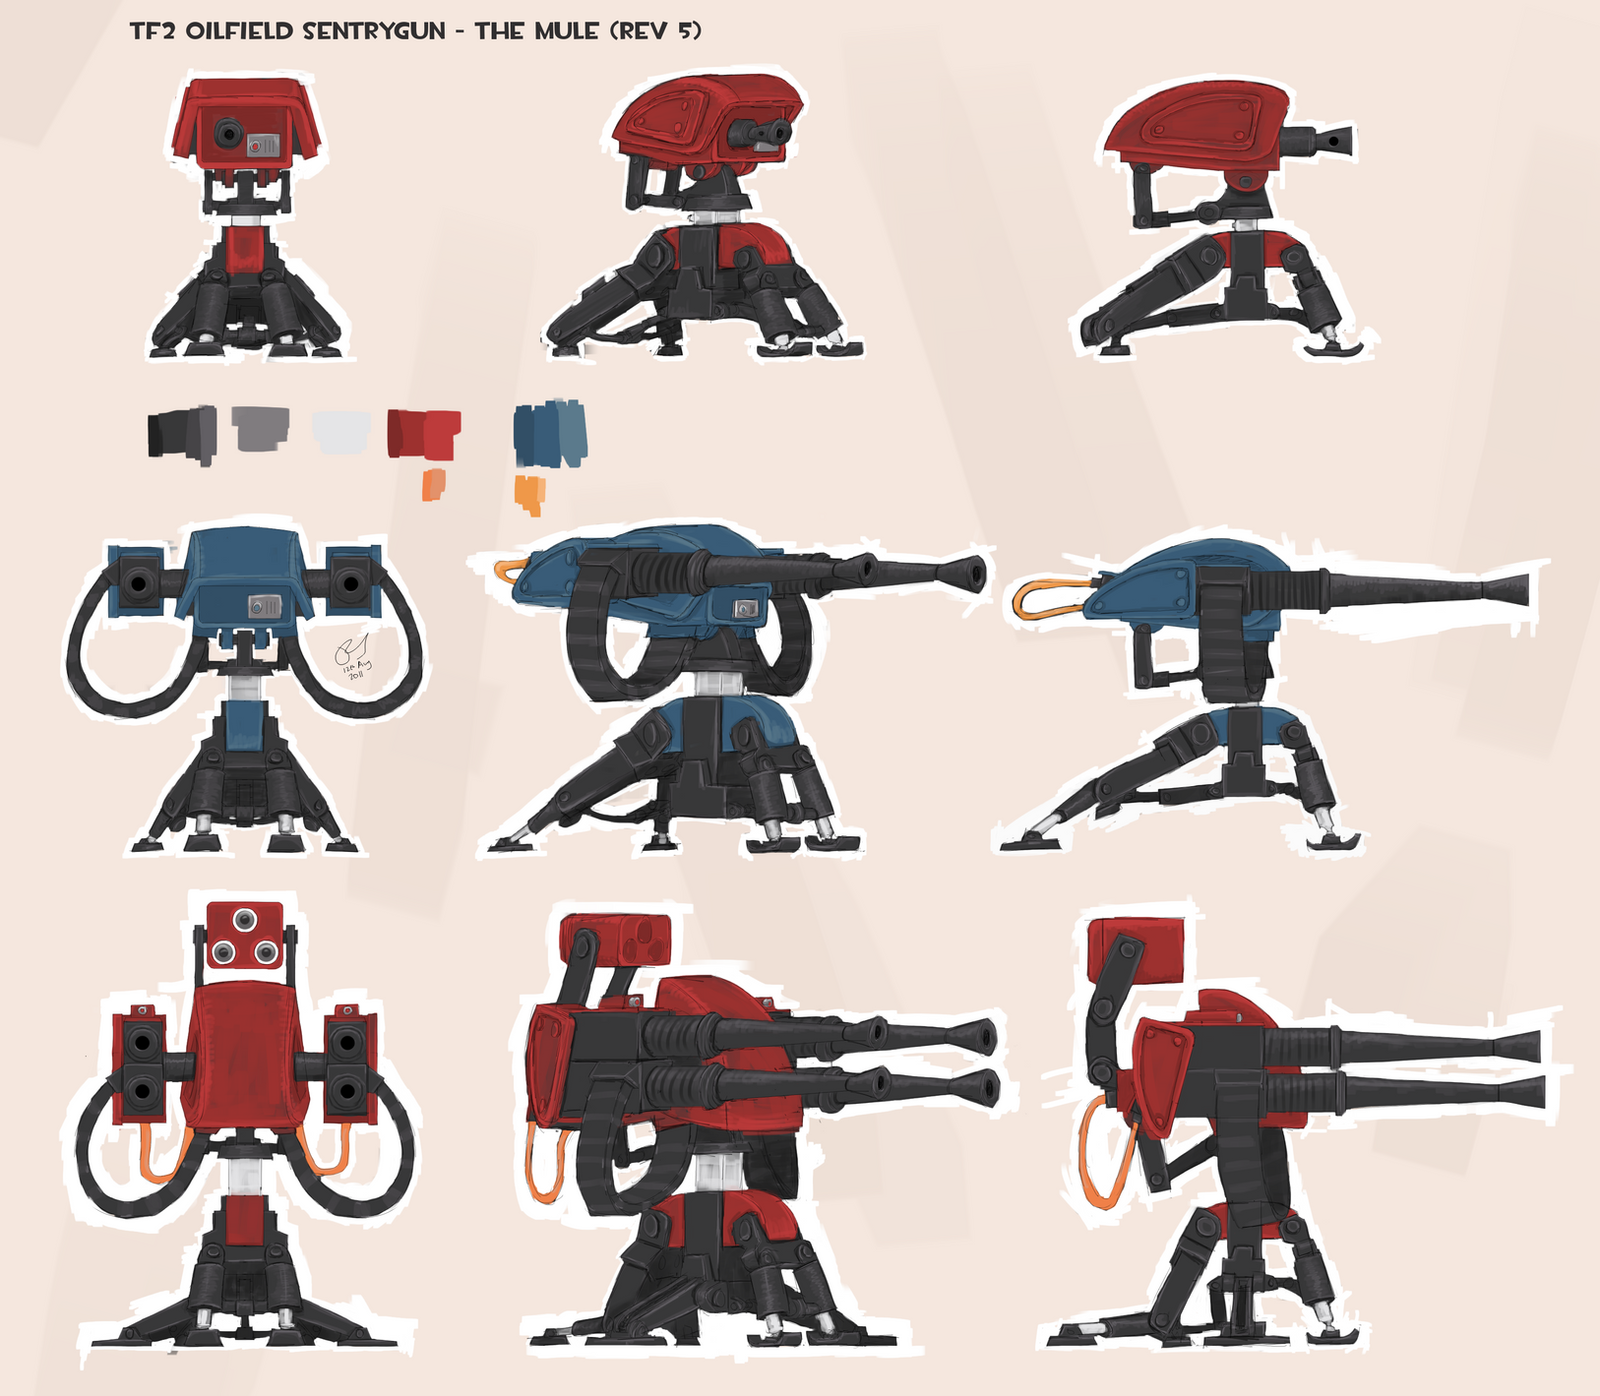 tf2_the_mule_rev5_concepts_by_elbagast-d468mzg.png